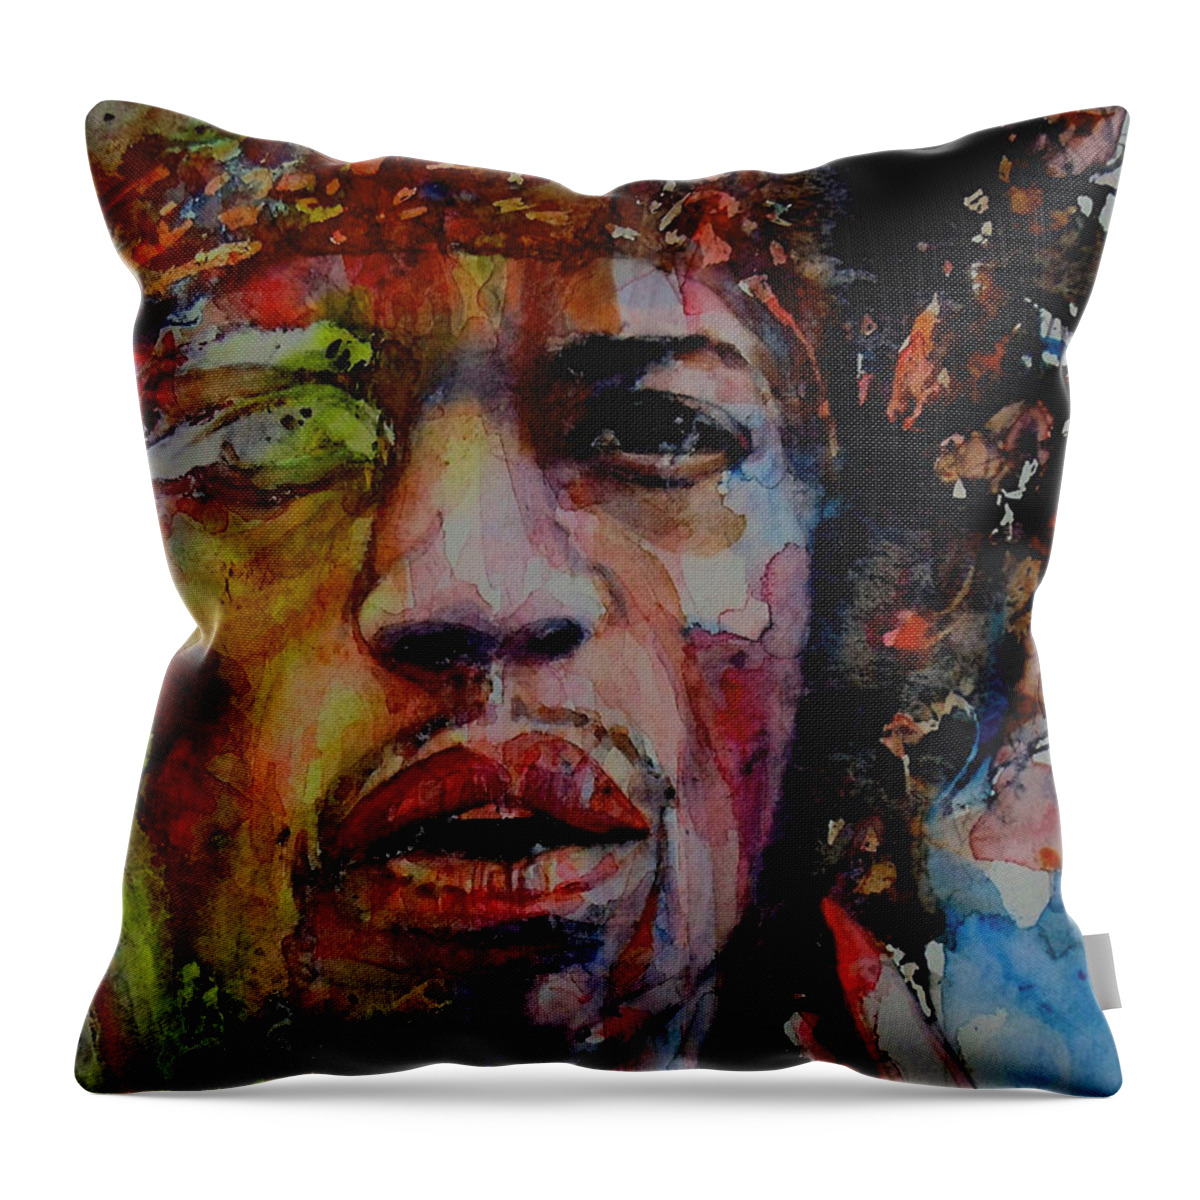 Hendrix Throw Pillow featuring the painting There Must Be Some Kind Of Way Out Of Here by Paul Lovering